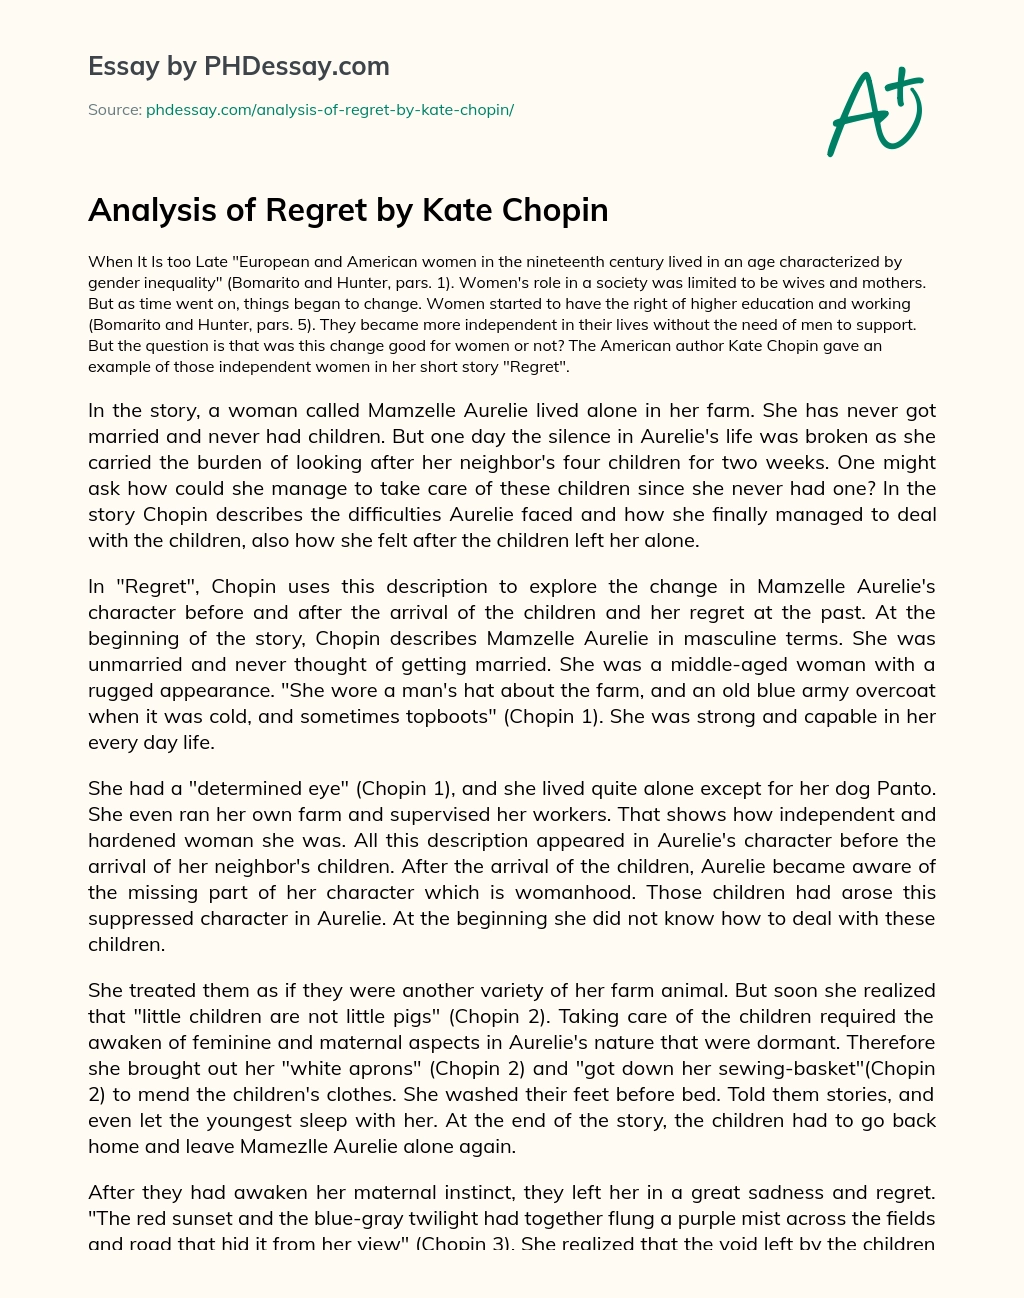 Analysis of Regret by Kate Chopin essay